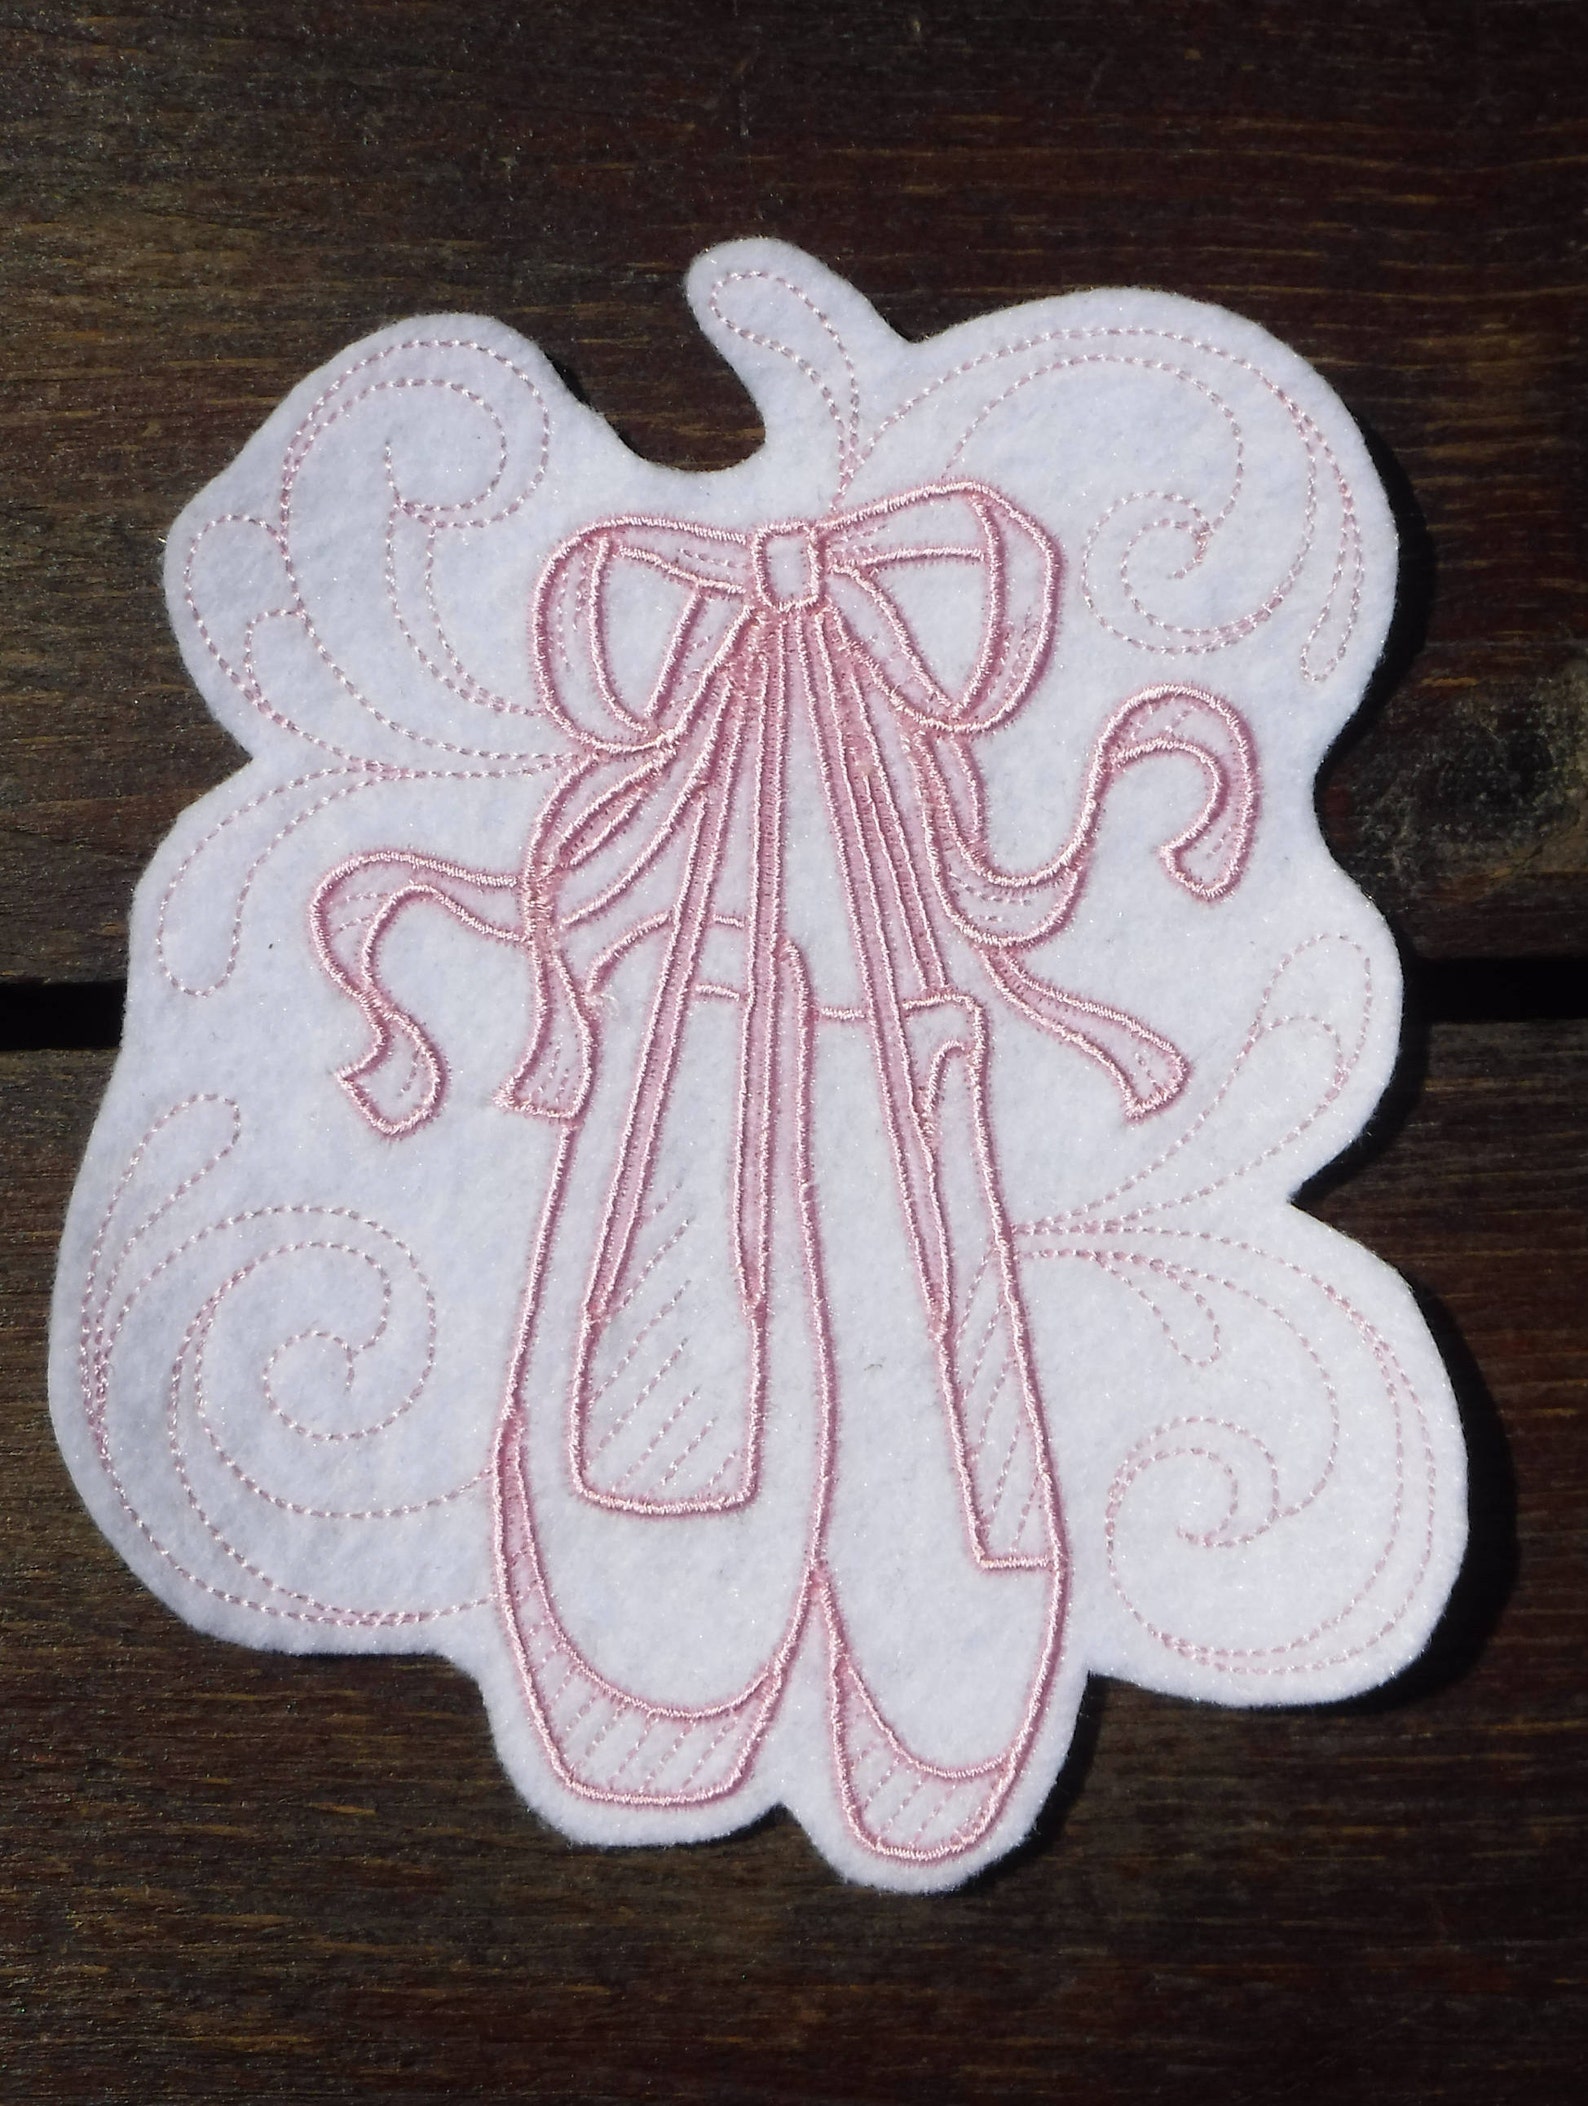 ballet patch - ballet shoes - iron on patch - embroidered applique - ballet gifts - embroidered gifts - pink patch - ballerina g